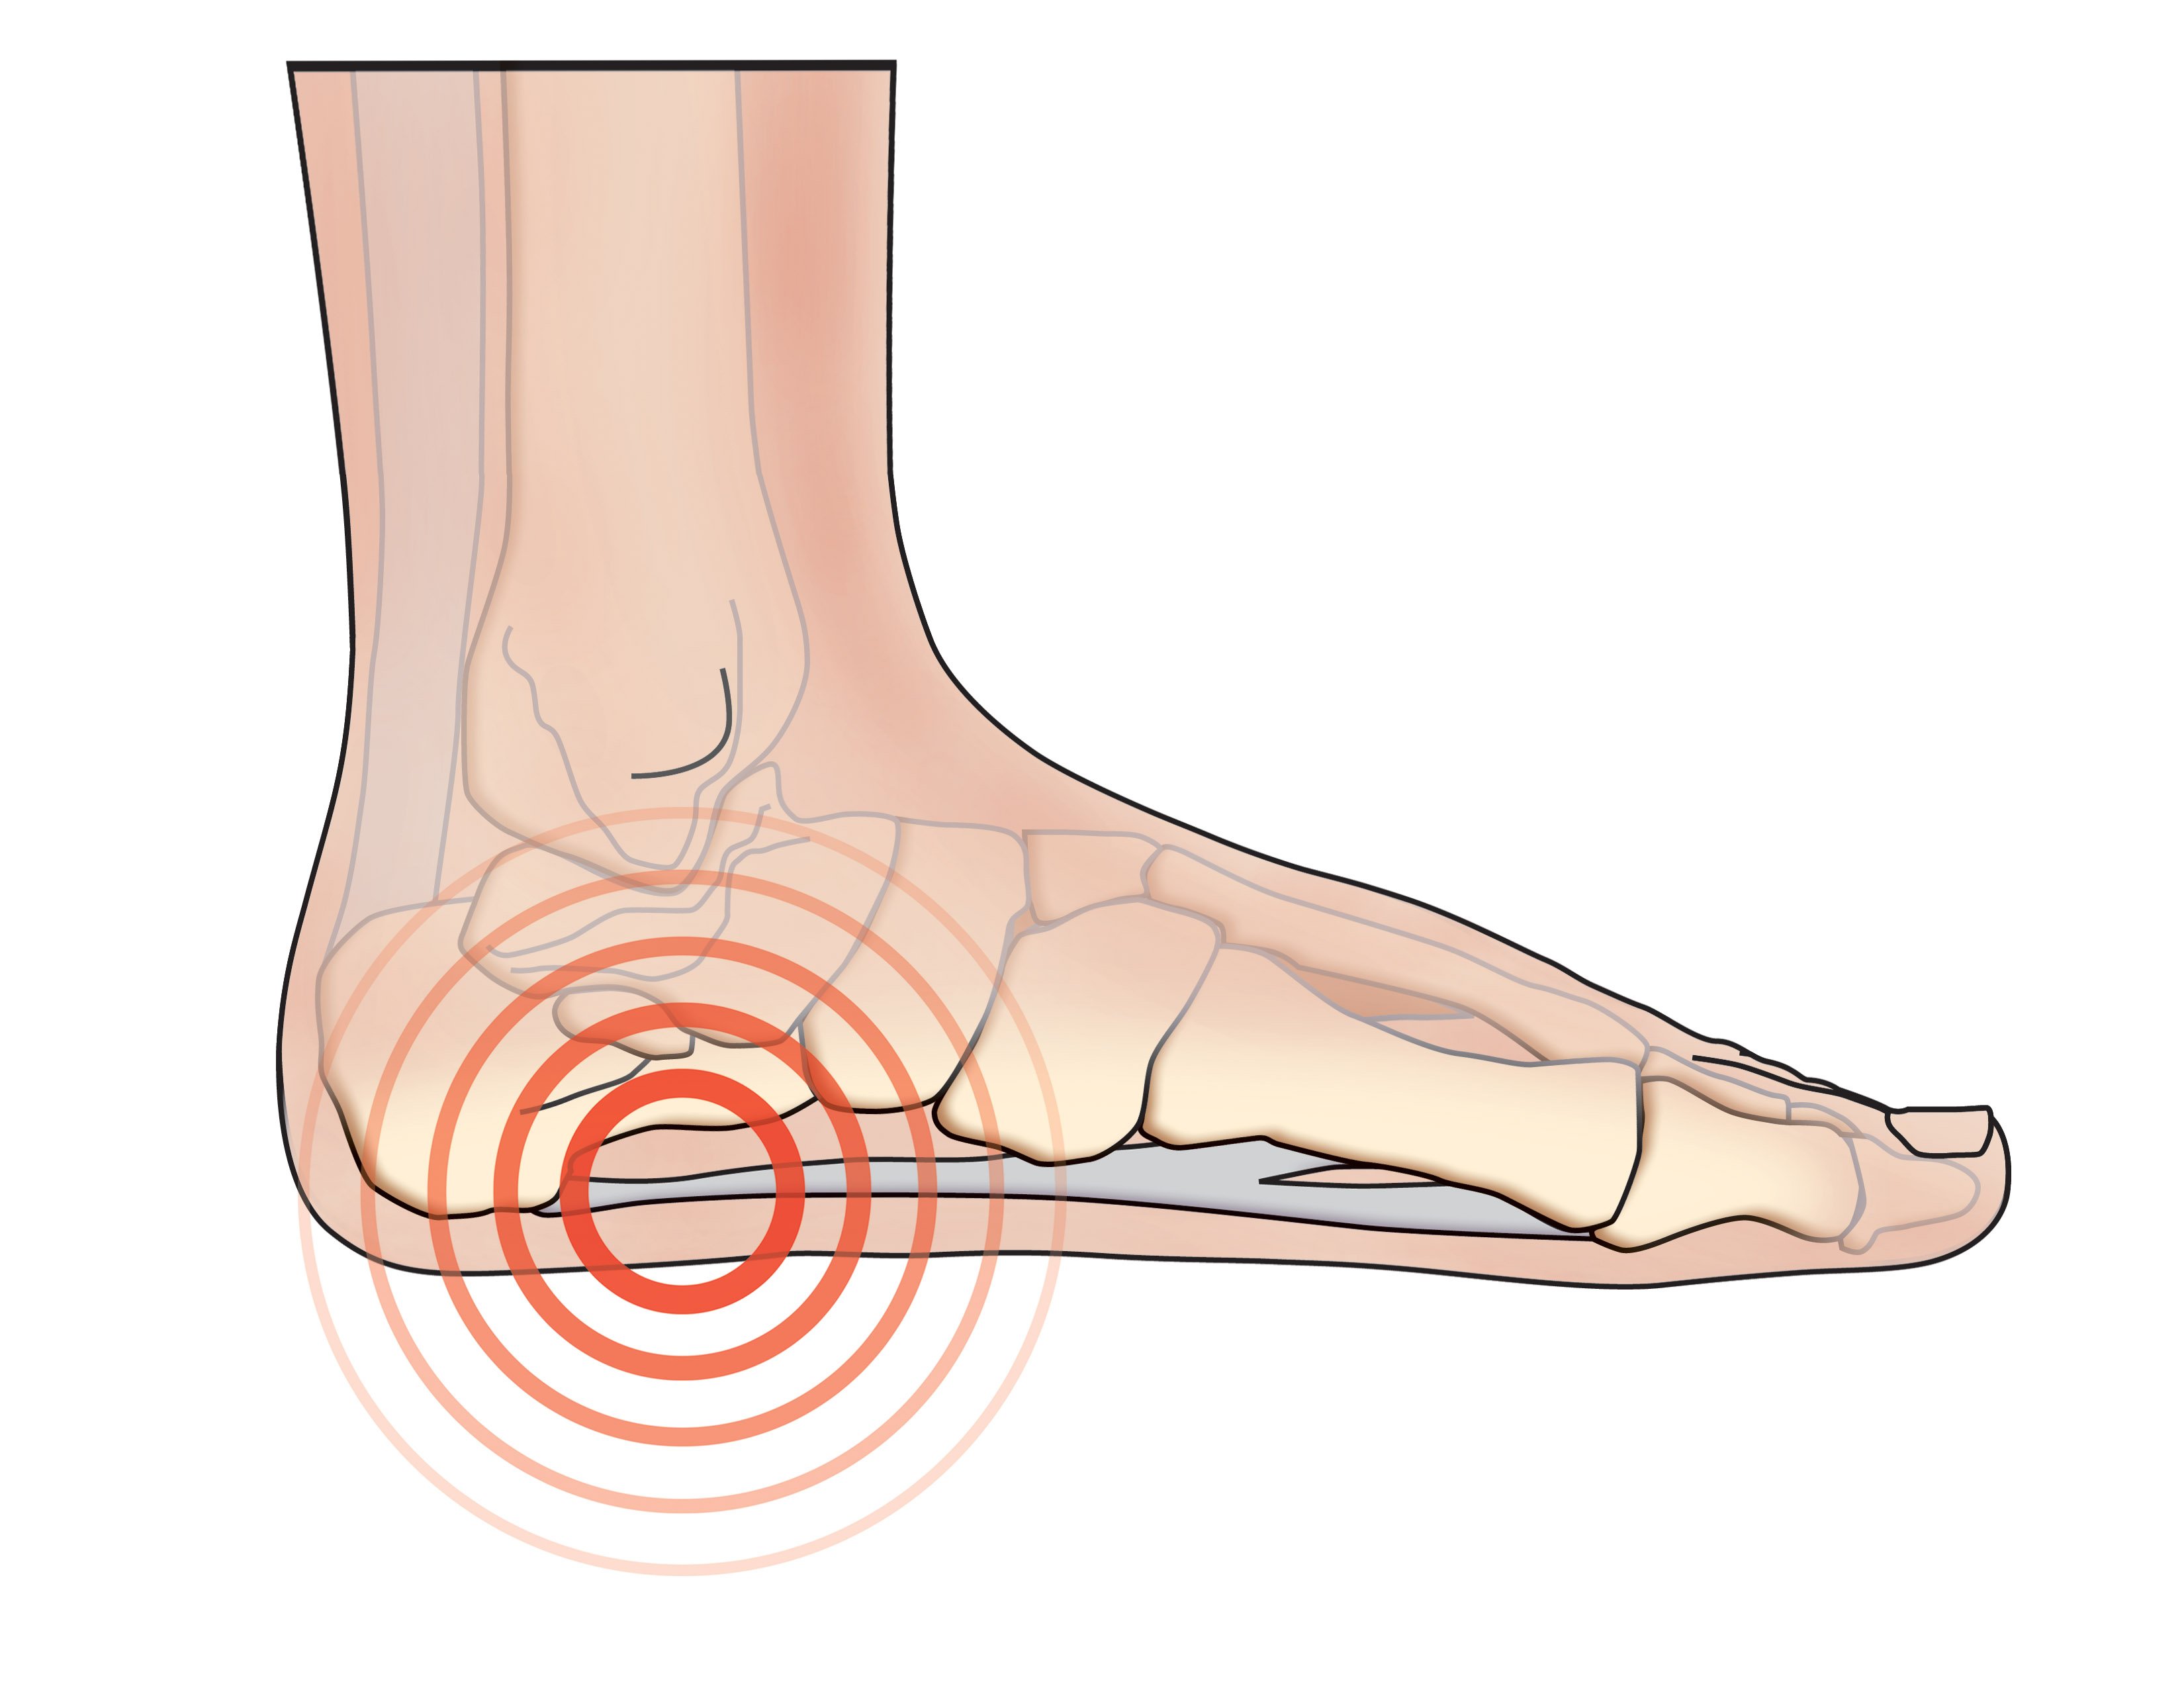 The 10 Best Natural Remedies for Plantar Fasciitis, and 4 to Skip